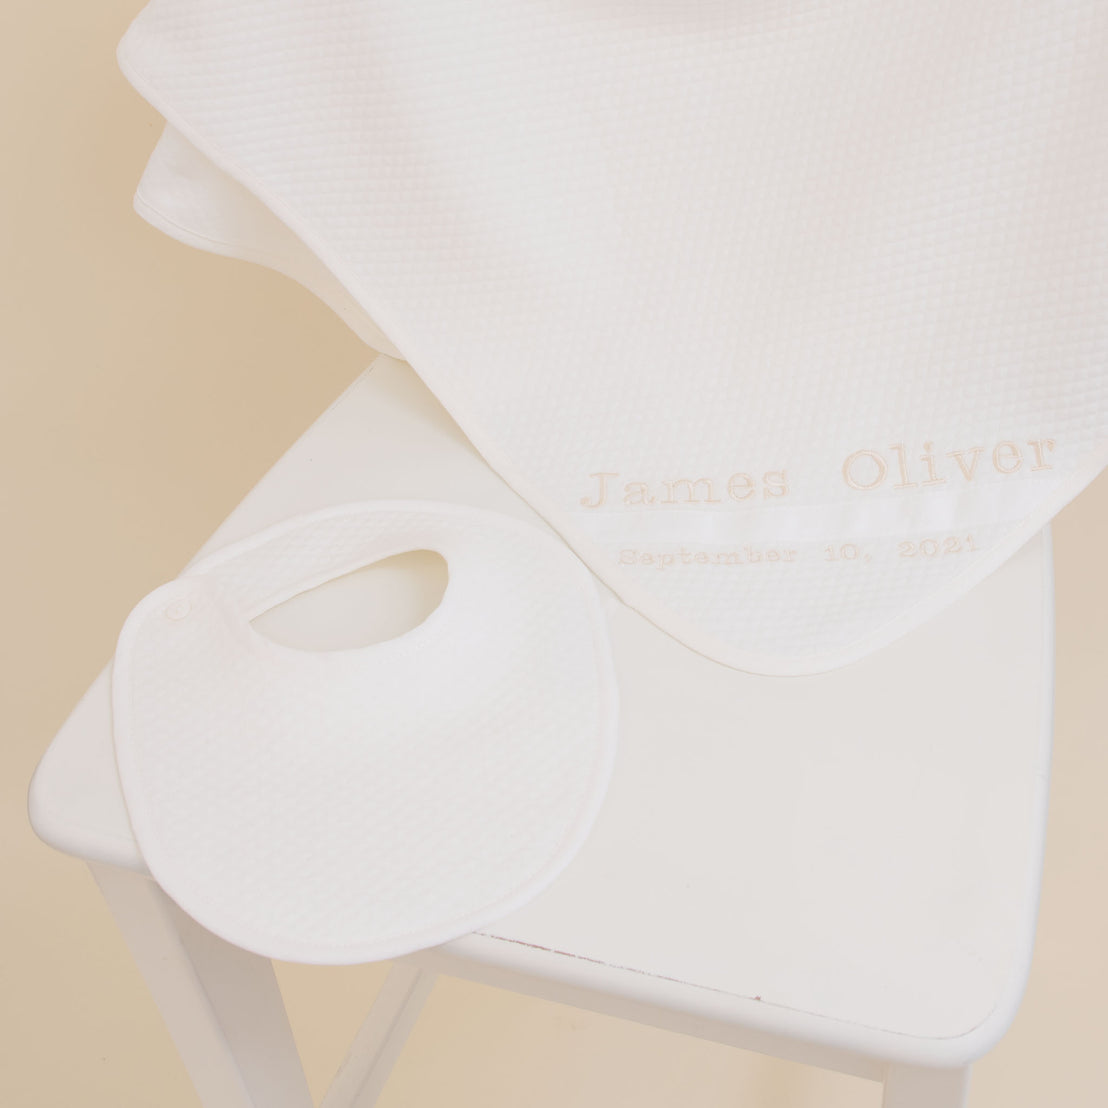 A Baby Beau & Belle Baby Boy Personalized Gift Set with the name "James Oliver" and the date "September 10, 2021," embroidered as a keepsake, resting on a white chair with a soft fabric backdrop